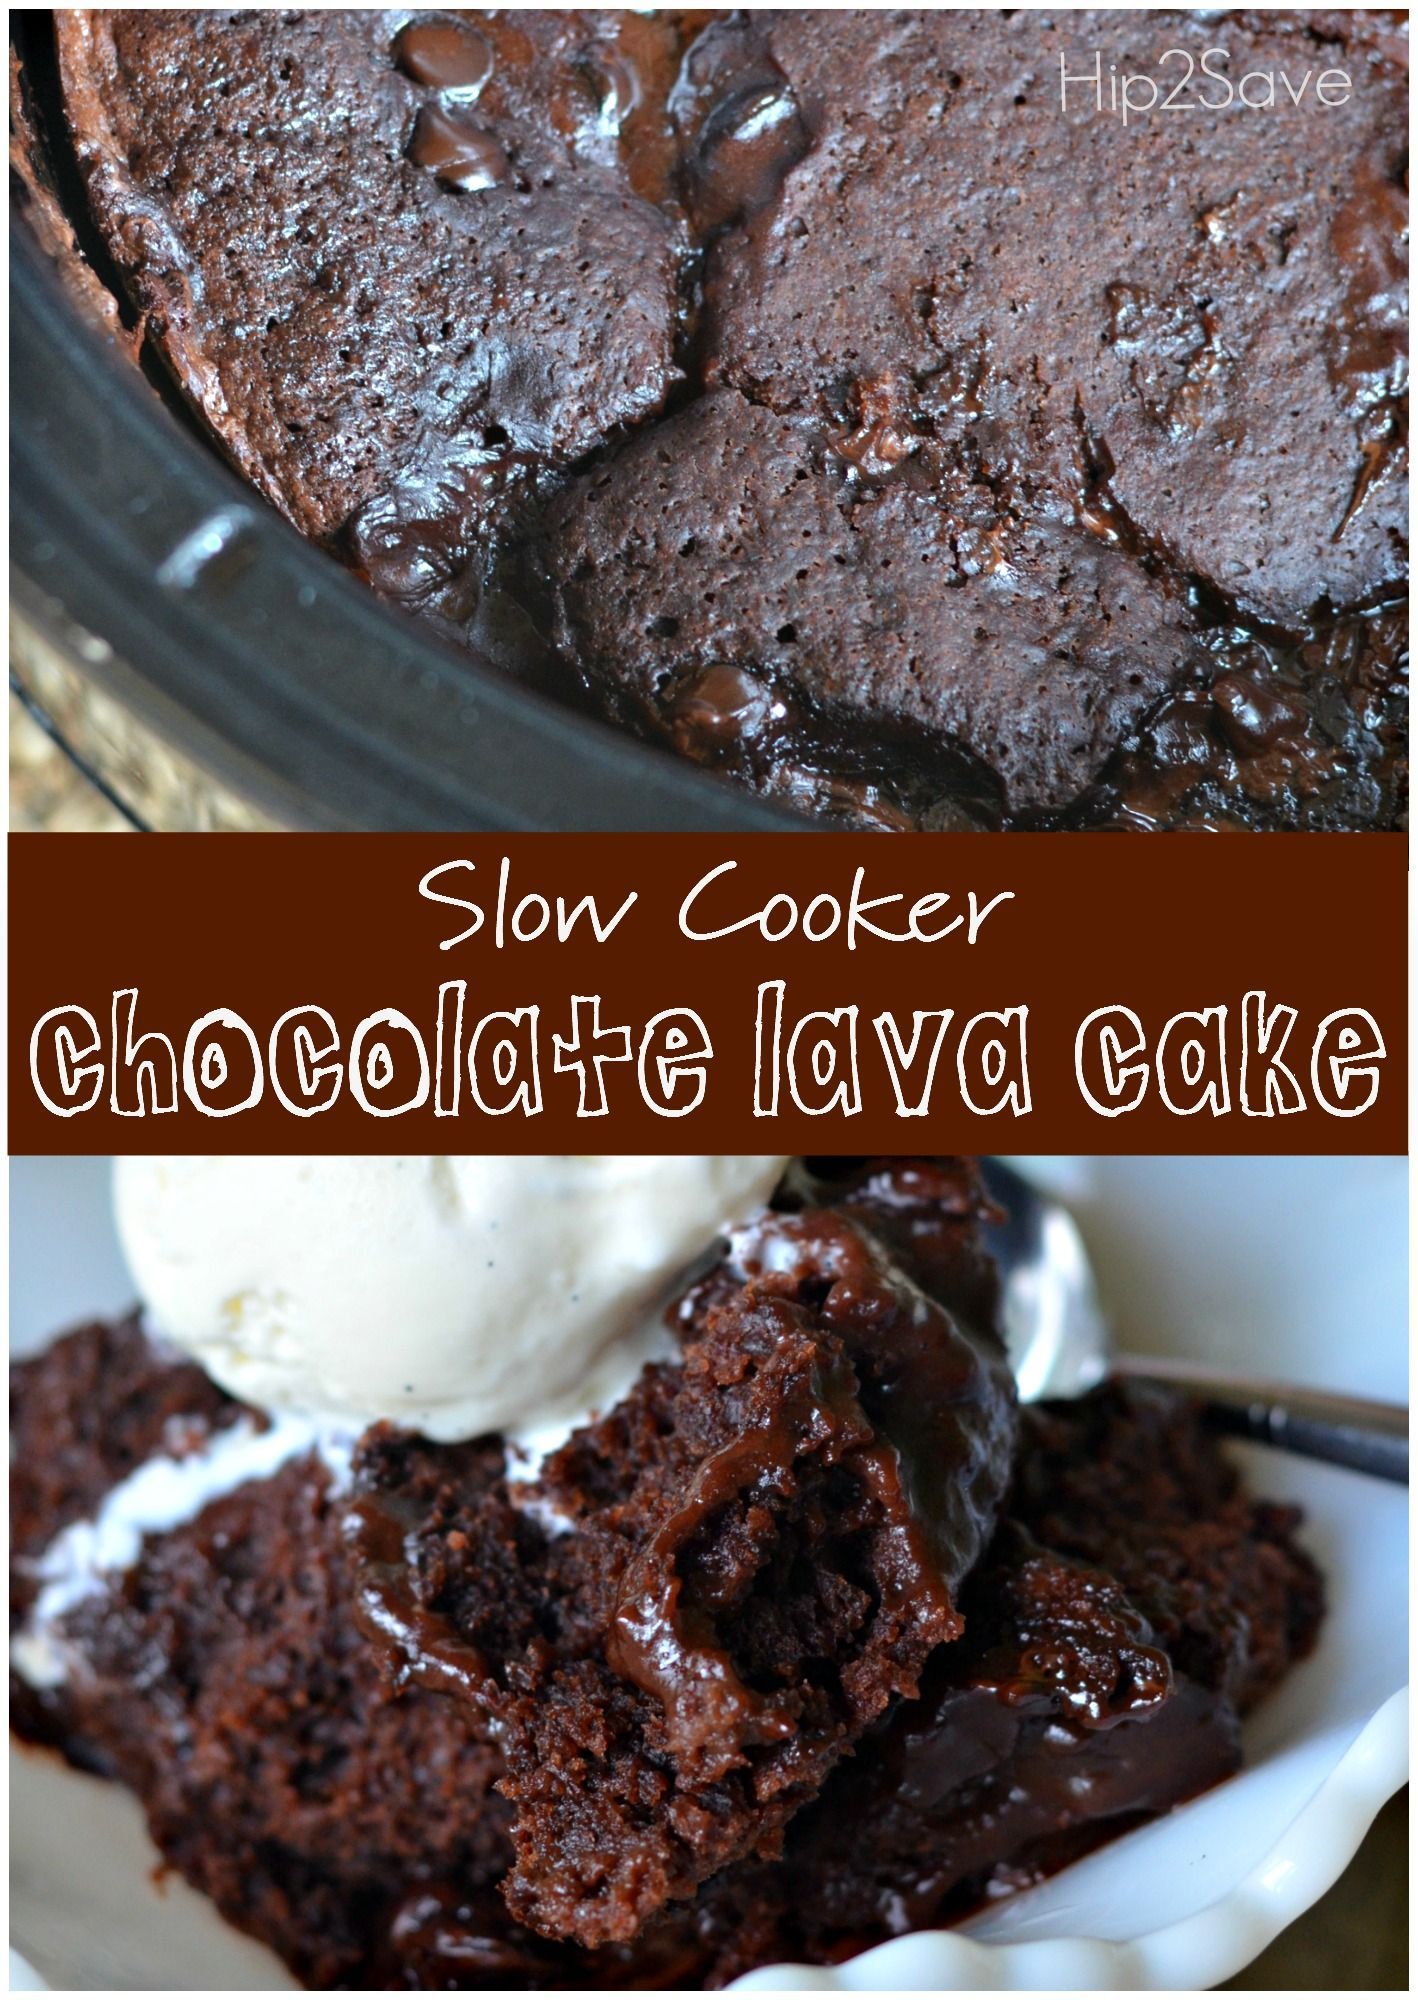 Slow Cooker Chocolate Lava Cake -   16 slow cooker desserts
 ideas